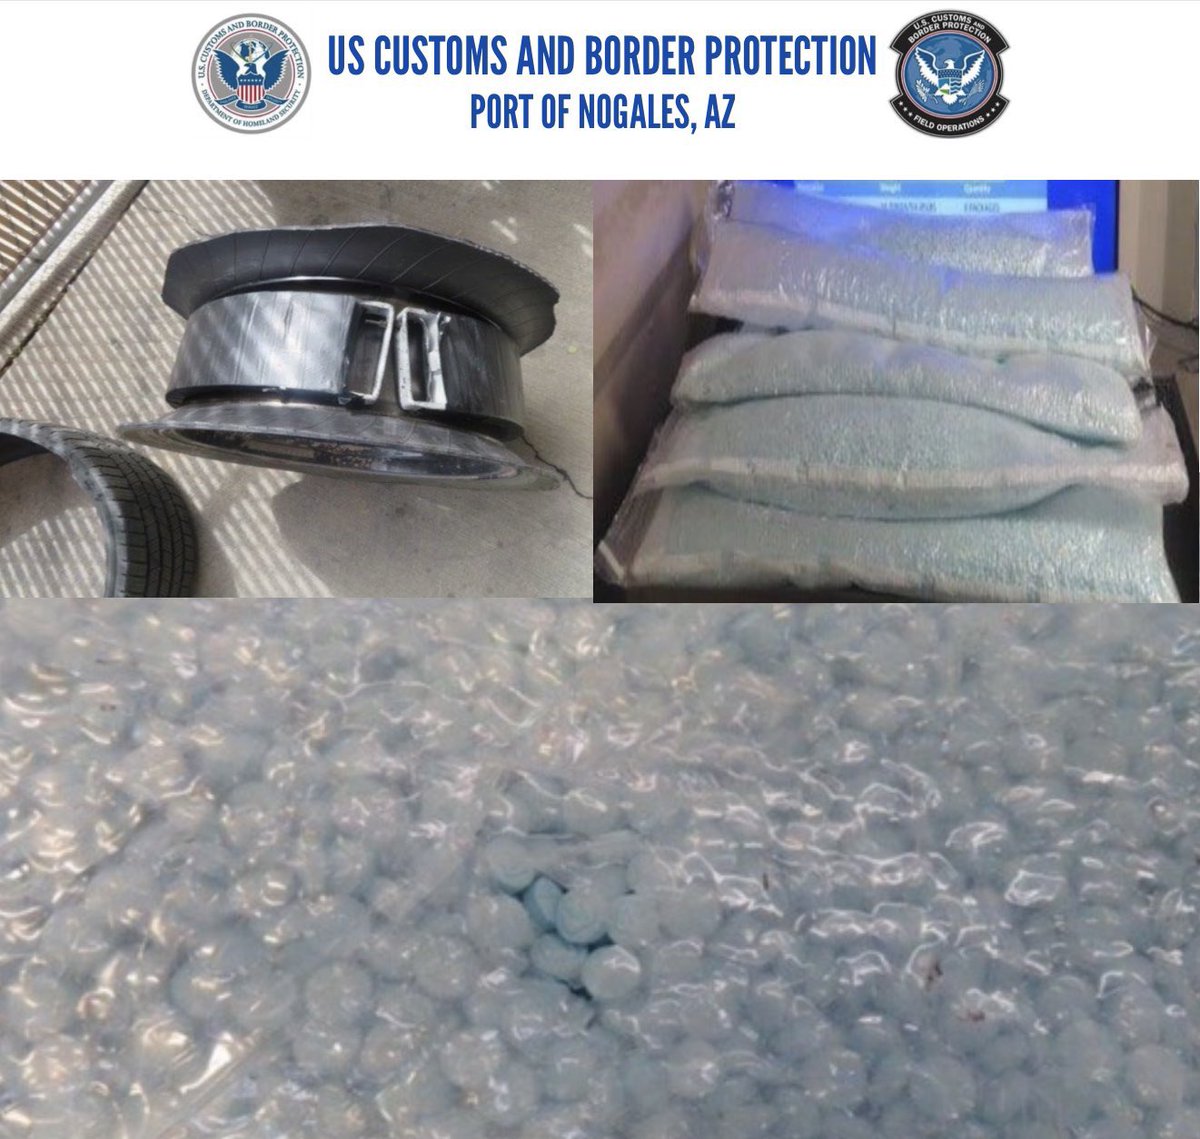 NEW: Enormous fentanyl busts around the U.S. - @DEALOSANGELES busts 3 MX nationals w/ 1 million fentanyl pills in car. - Michigan police make largest fentanyl bust in state history during traffic stop - enough for 3 million pills - CBP in Nogales, AZ seize 560,000 pills in 2 days